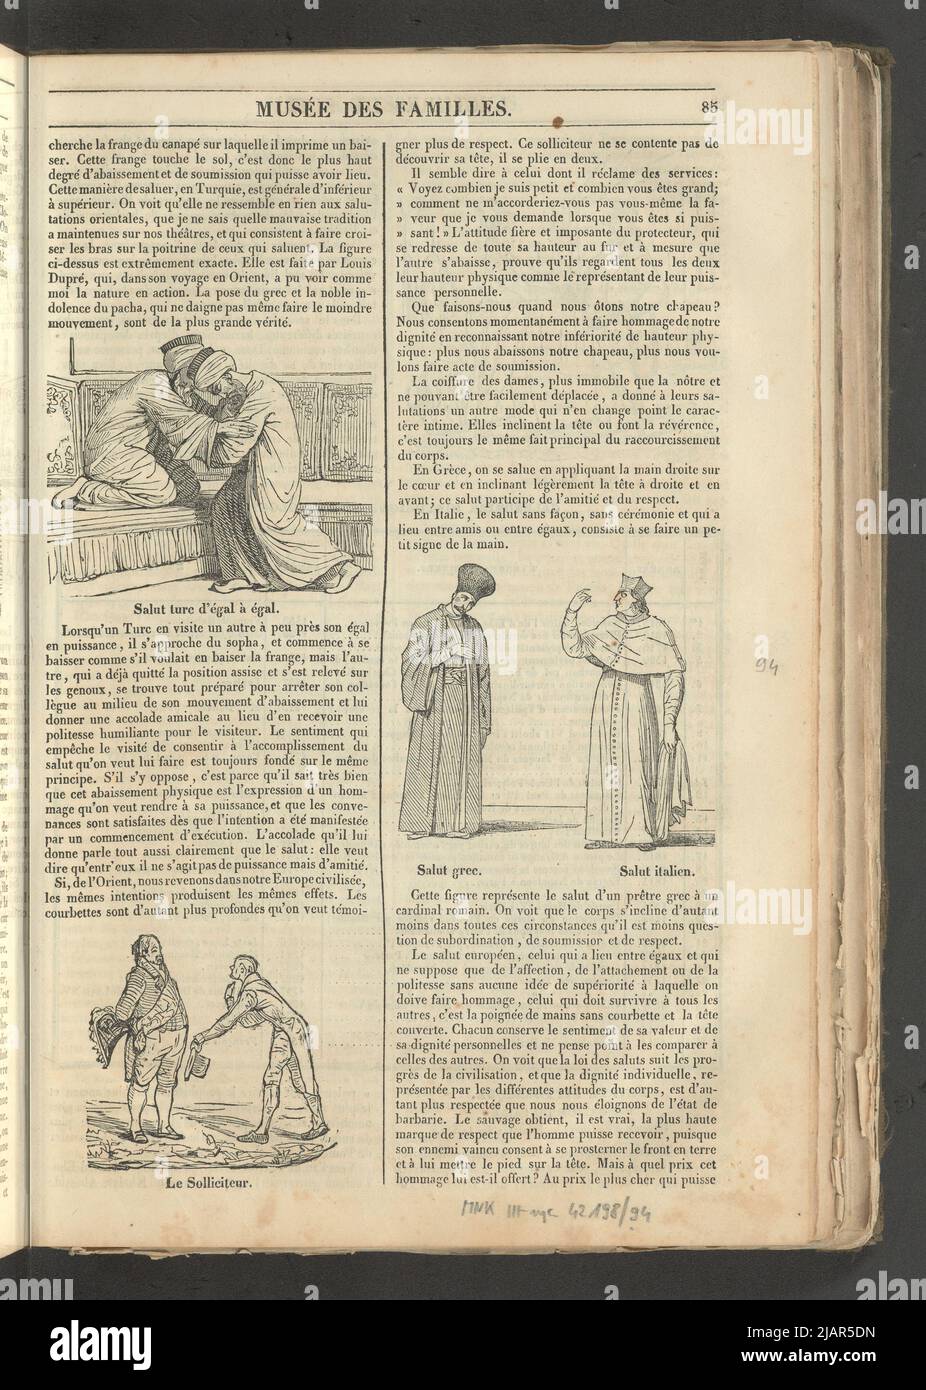 Yearbook 2, notebook 11, Mars 1834 Four ways to give worship and greeting, 4 illustrations for the article de la phrenologie in: Musee des Familles, lecture du soir. T. 1. (year 1 and 2) Paris, [1833 1834]. unknown Stock Photo